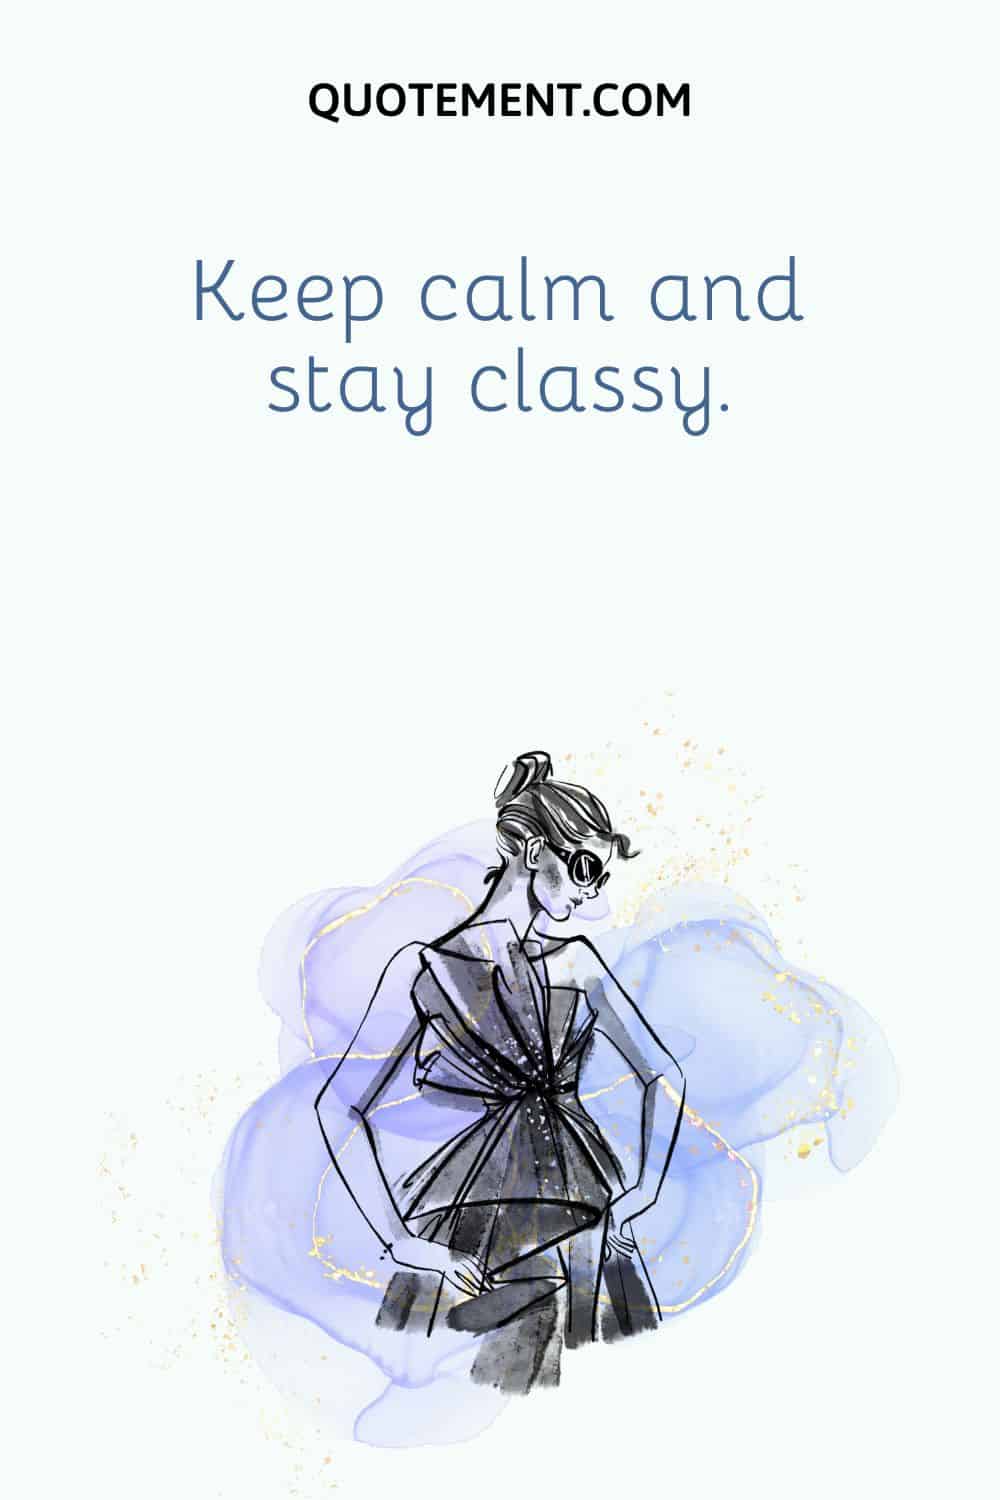 Keep calm and stay classy